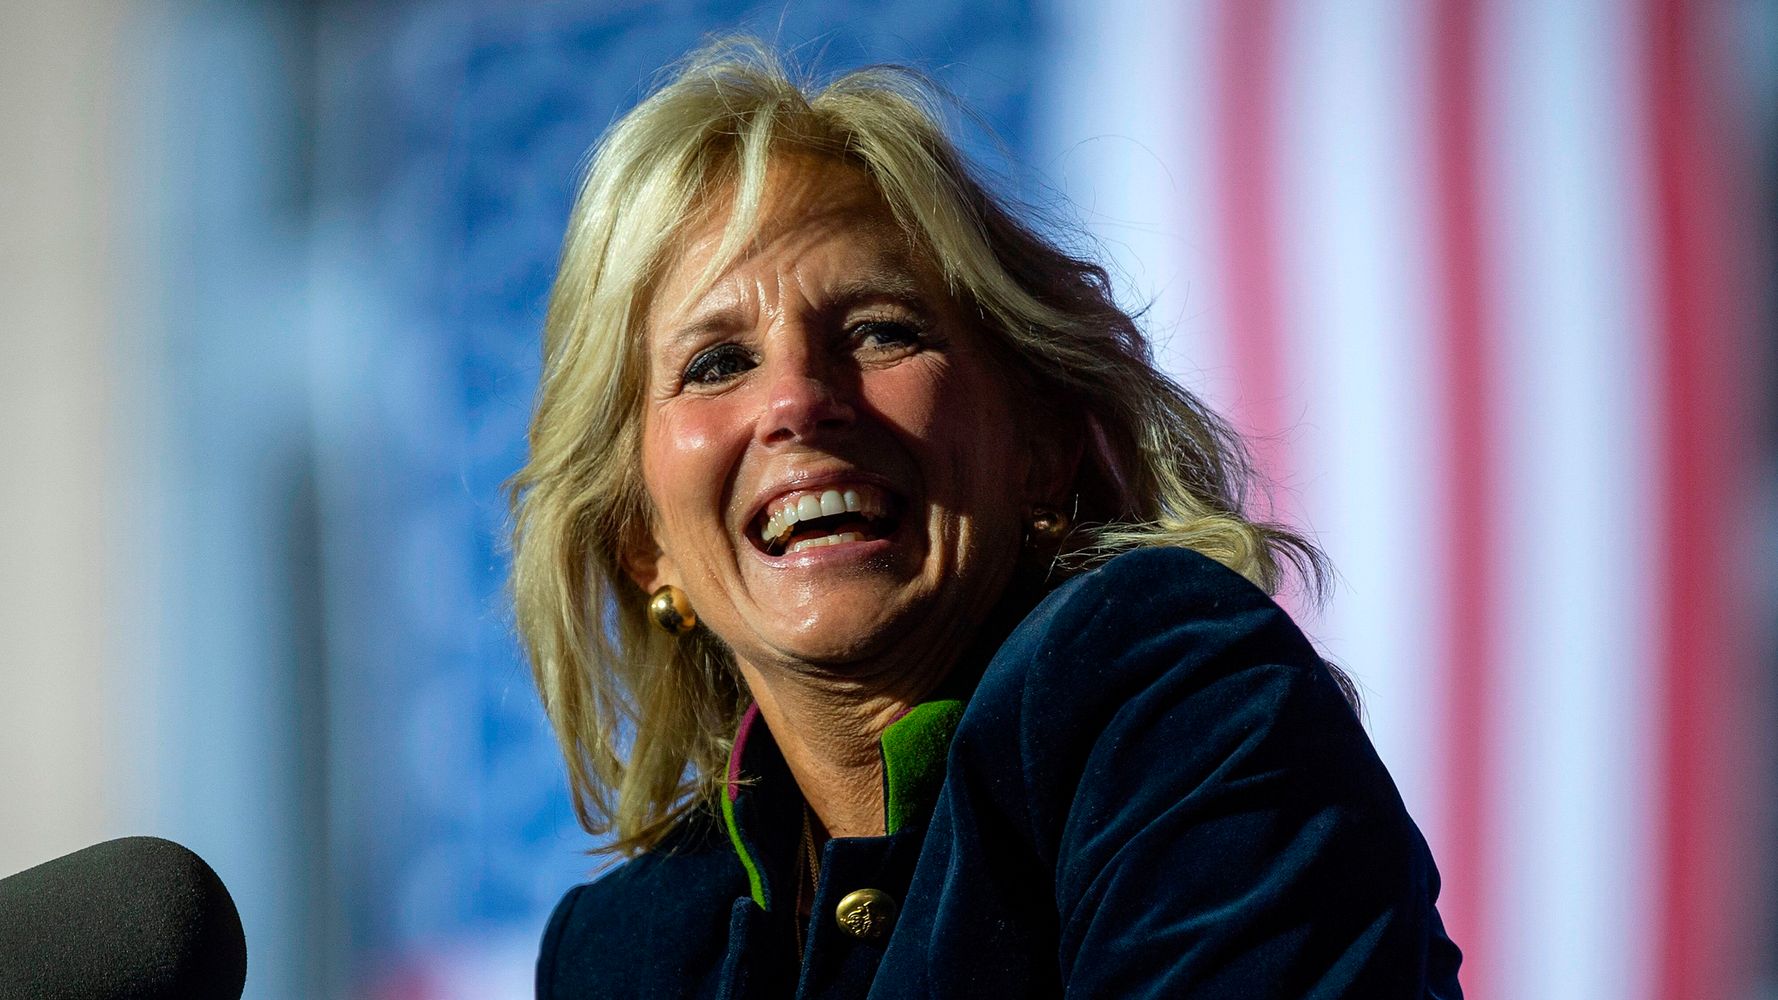 You are currently viewing Jill Biden Shares Note On Women Not Being ‘Diminished’ After Condescending WSJ Op-Ed